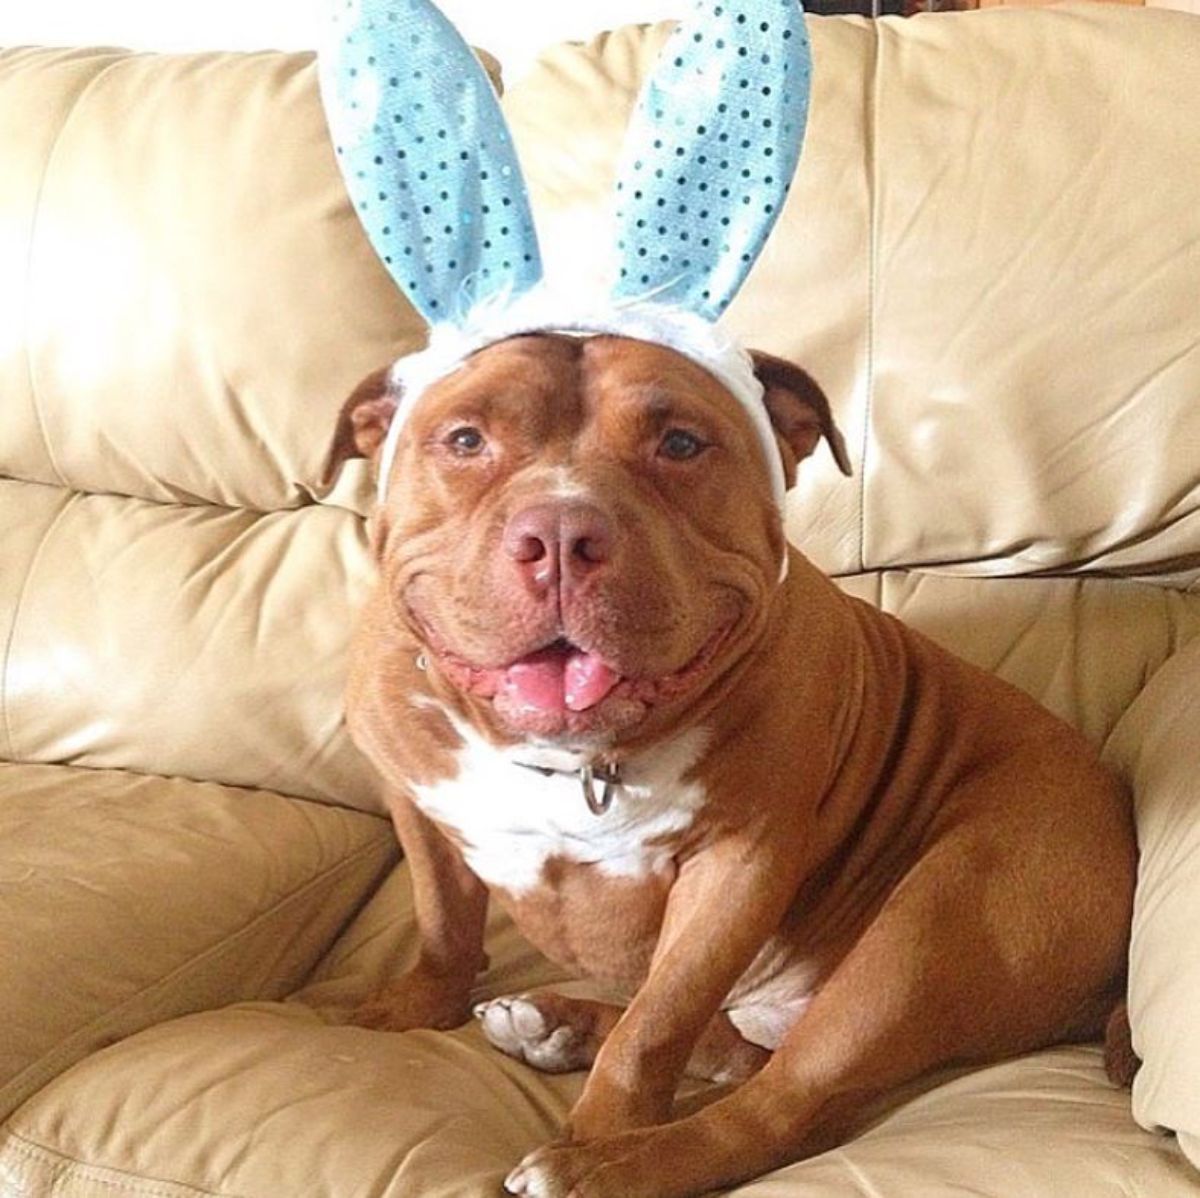 smiling brown and white pitbull wearing blue and white bunny ears sitting on a brown sofa